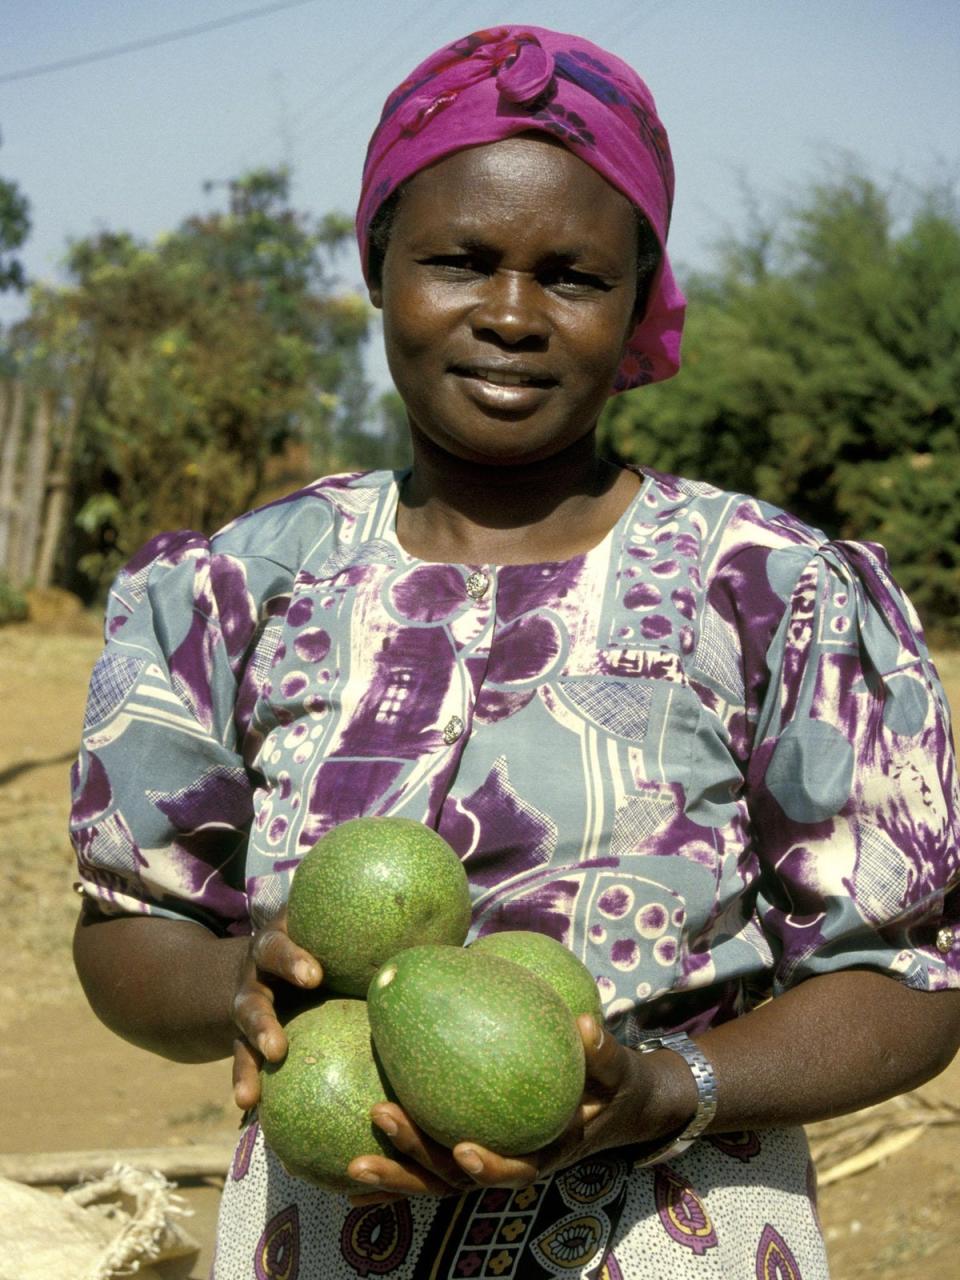 Kenya banned exporting avocados this week because the country's own supply was at risk  (Alamy)